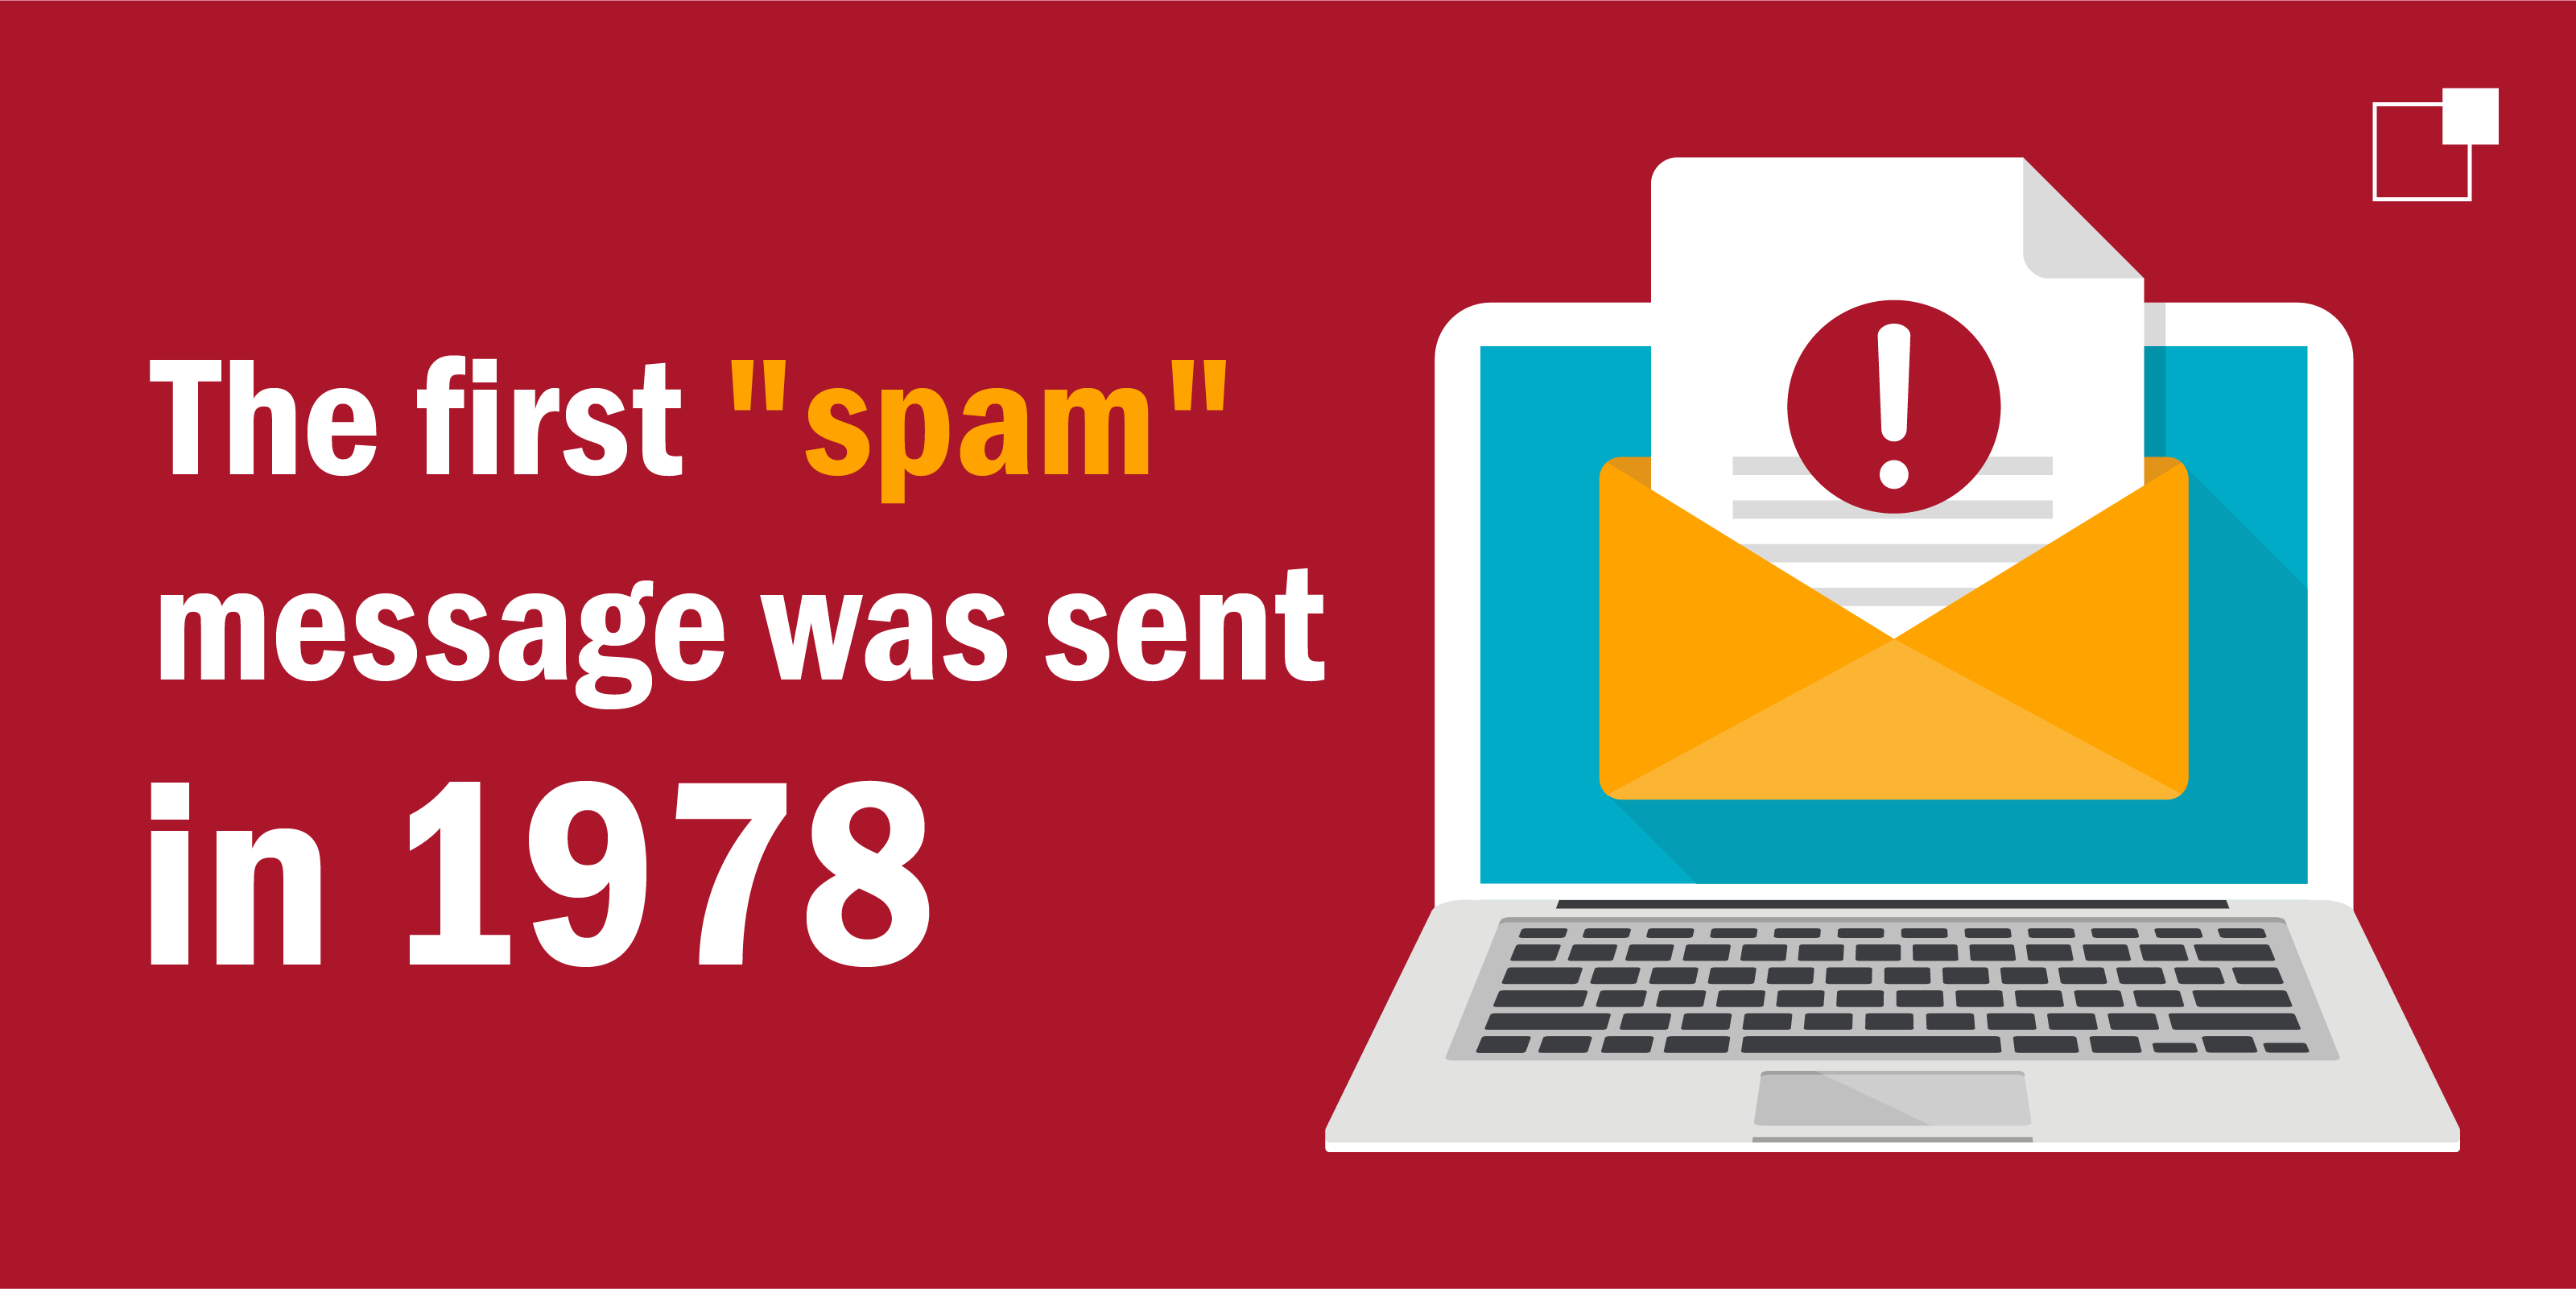 The first "spam" message was sent in 1978.